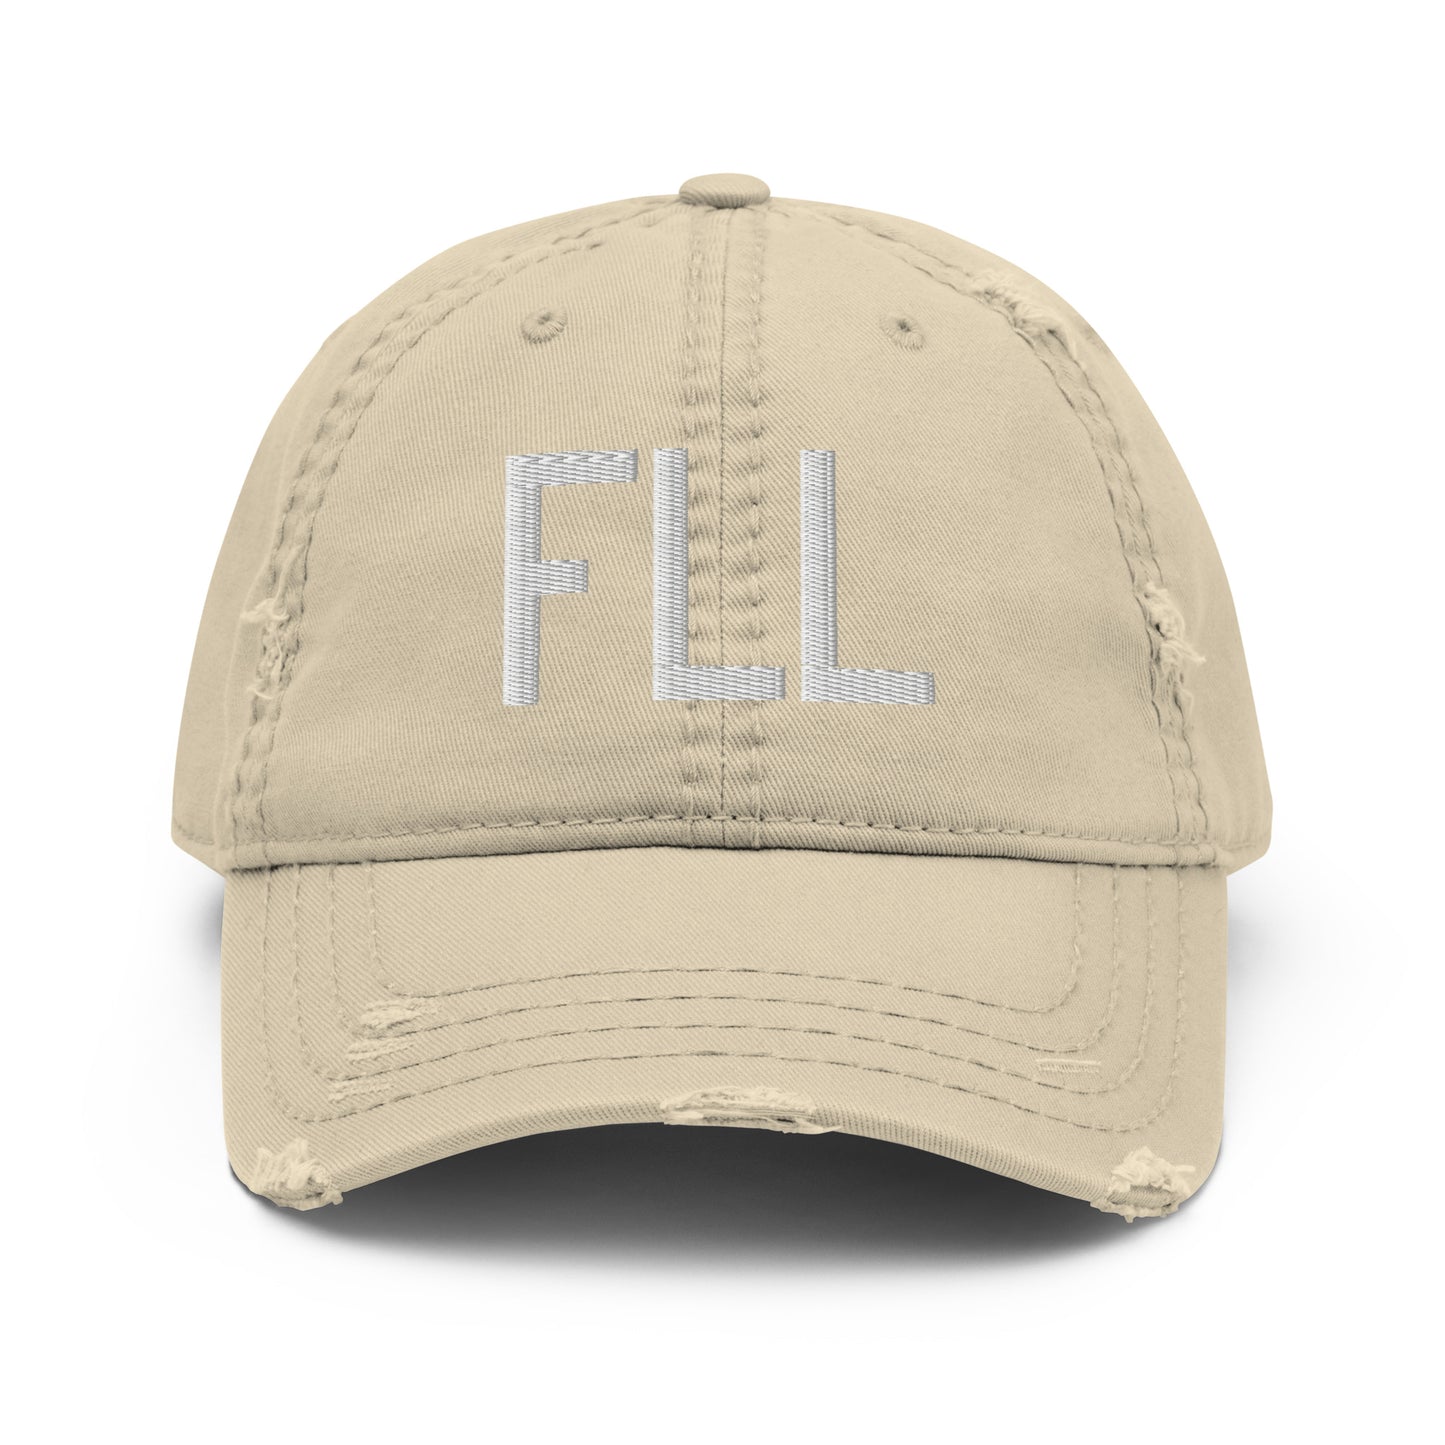 Airport Code Distressed Hat - White • FLL Fort Lauderdale • YHM Designs - Image 18